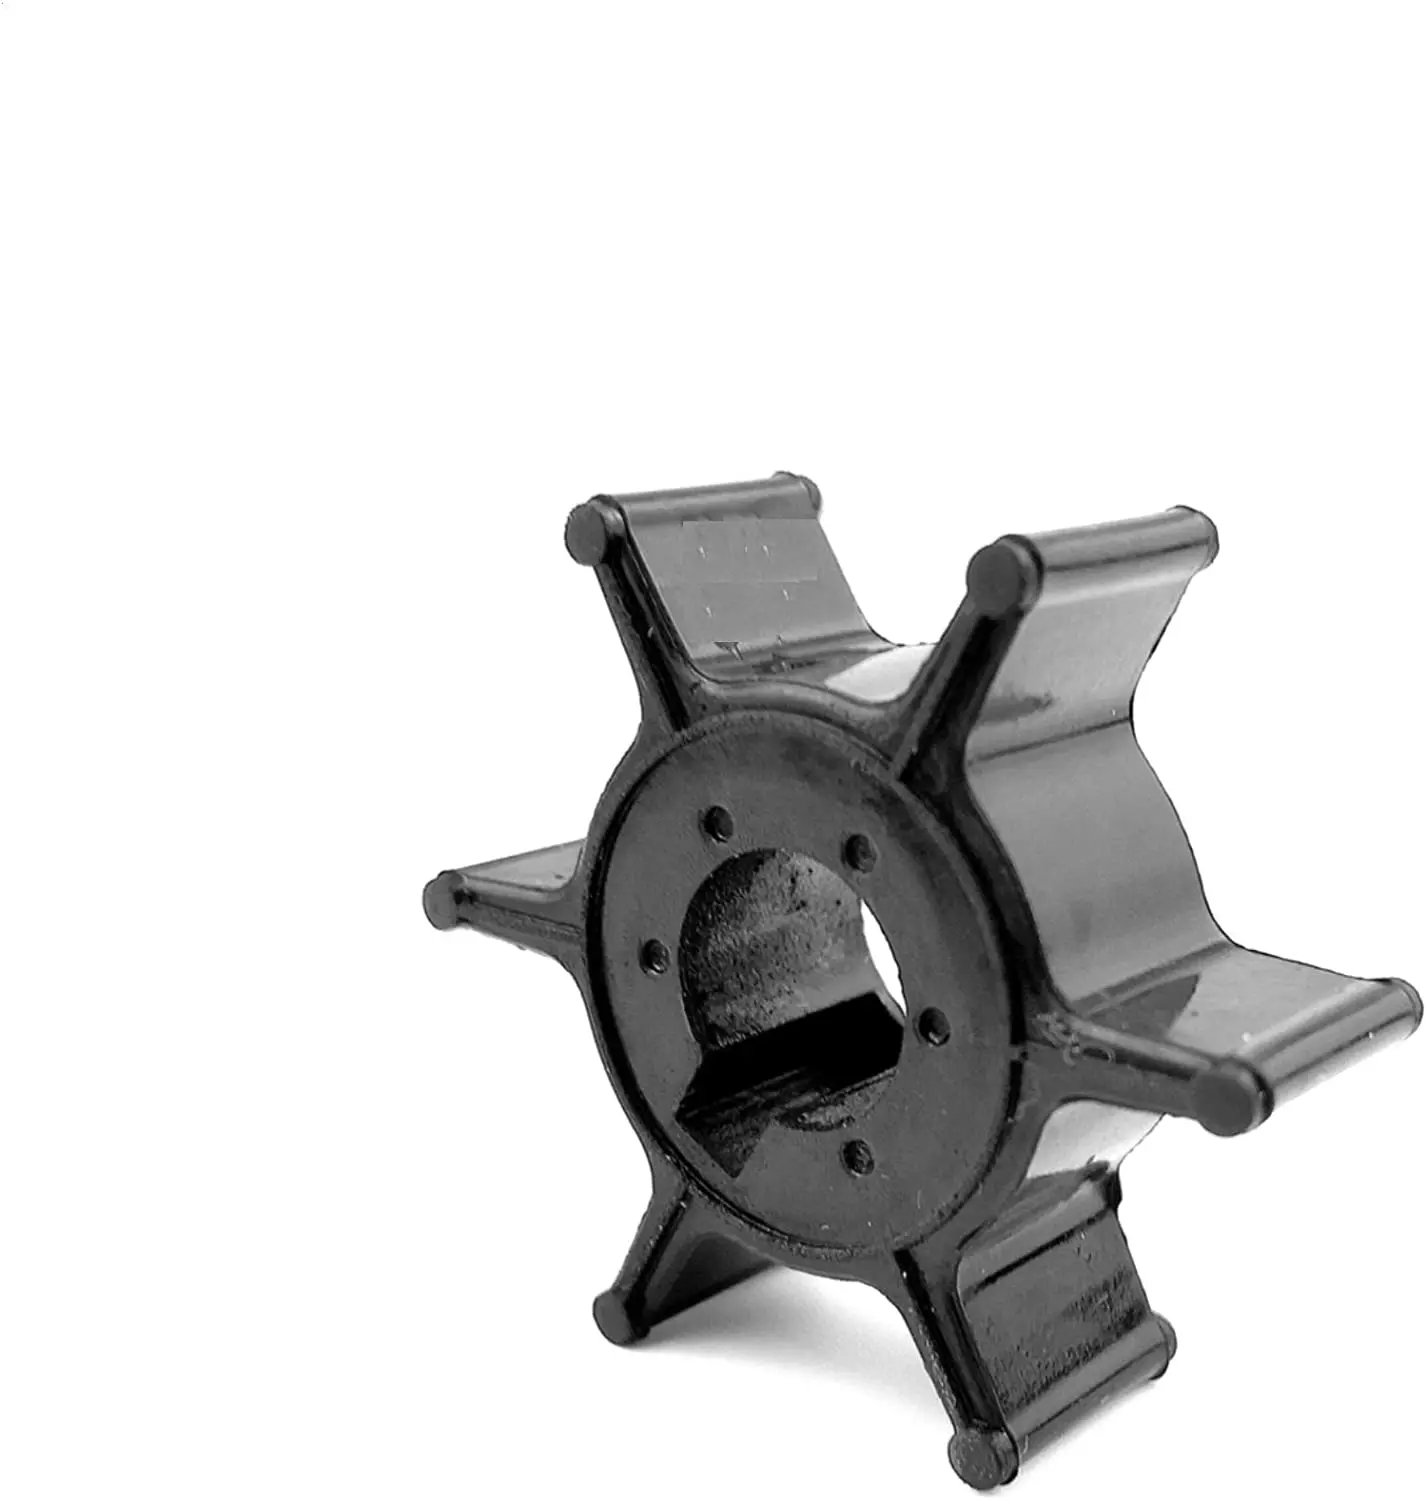 Yamaha / Parsun Impeller for 2/2.5/3 HP and Malta (6L5-44352-00